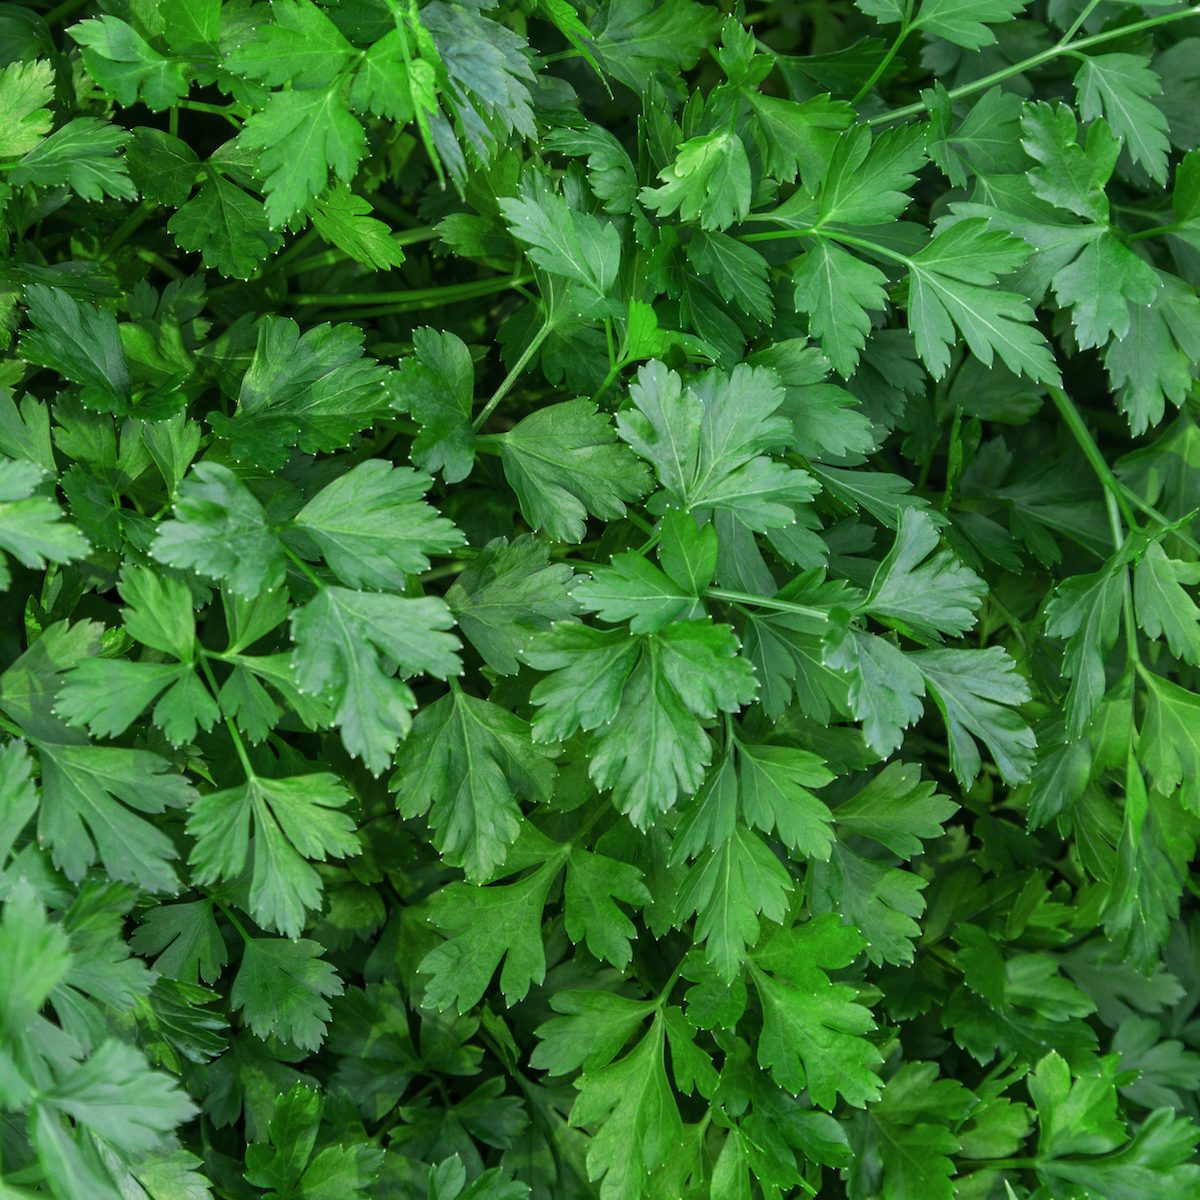 Green parsley in the garden close up